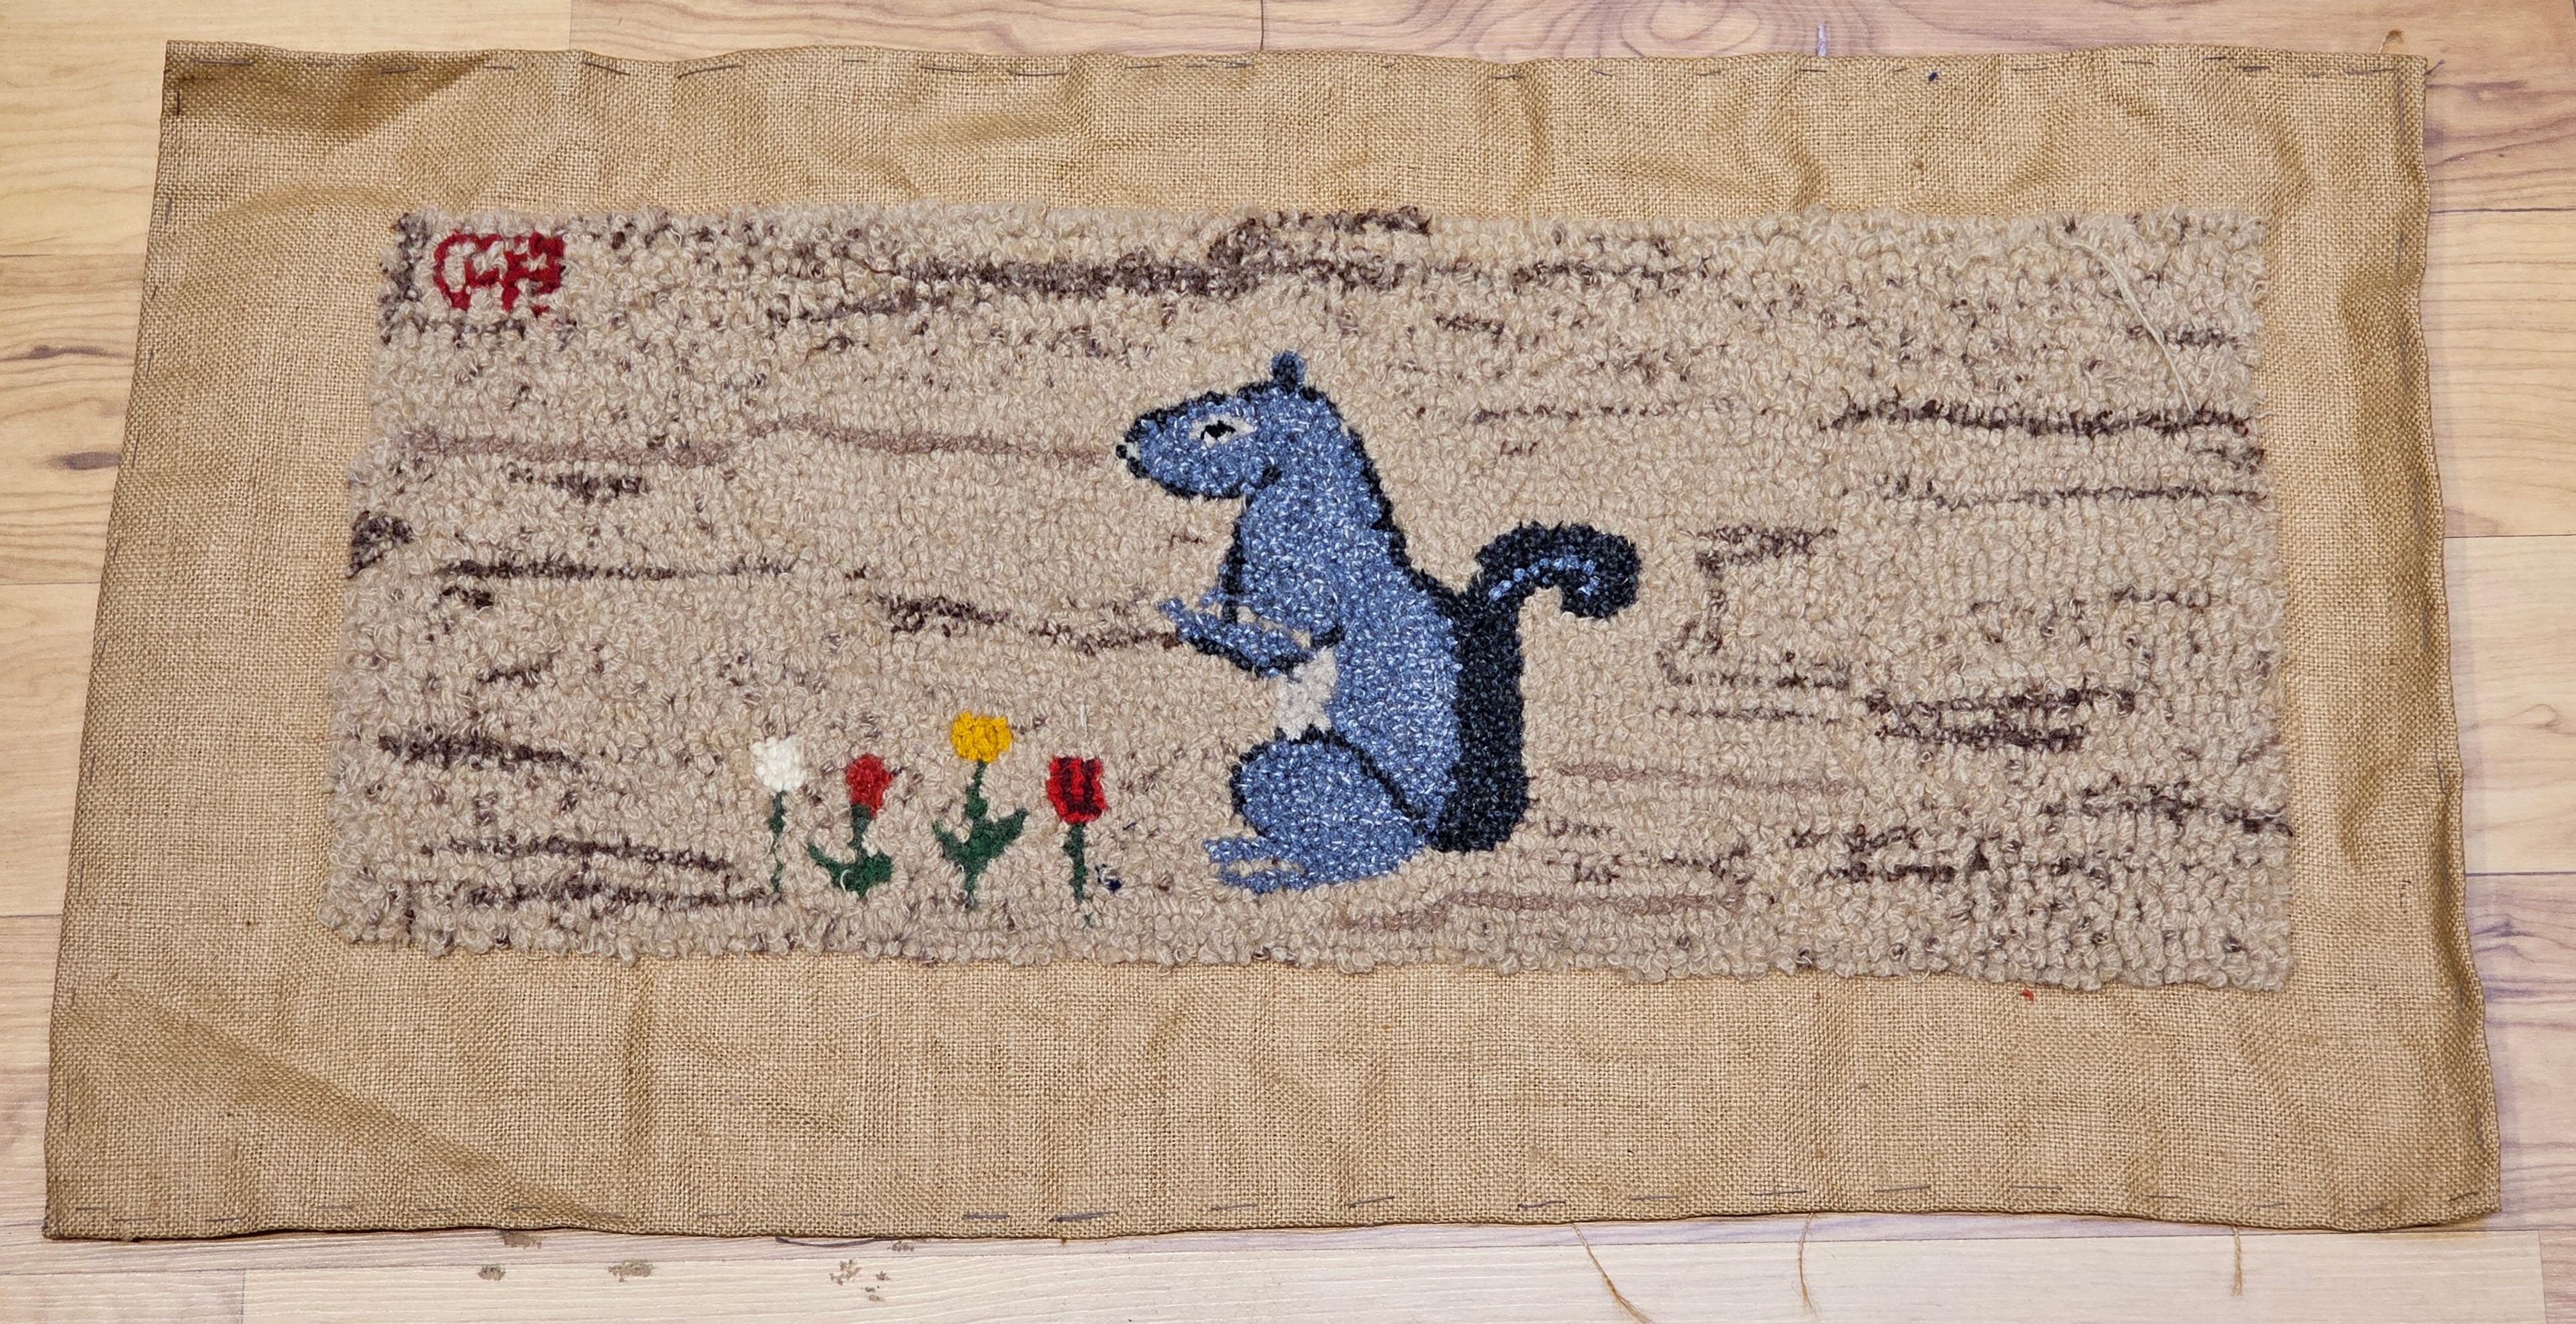 Vintage American  hand hooked rug in a wonderful depiction of a standing squirrel and looking out design.  The rug has a delightful design and colors including Khaki background and design colors of  lavender red, green, yellow and white.    We are